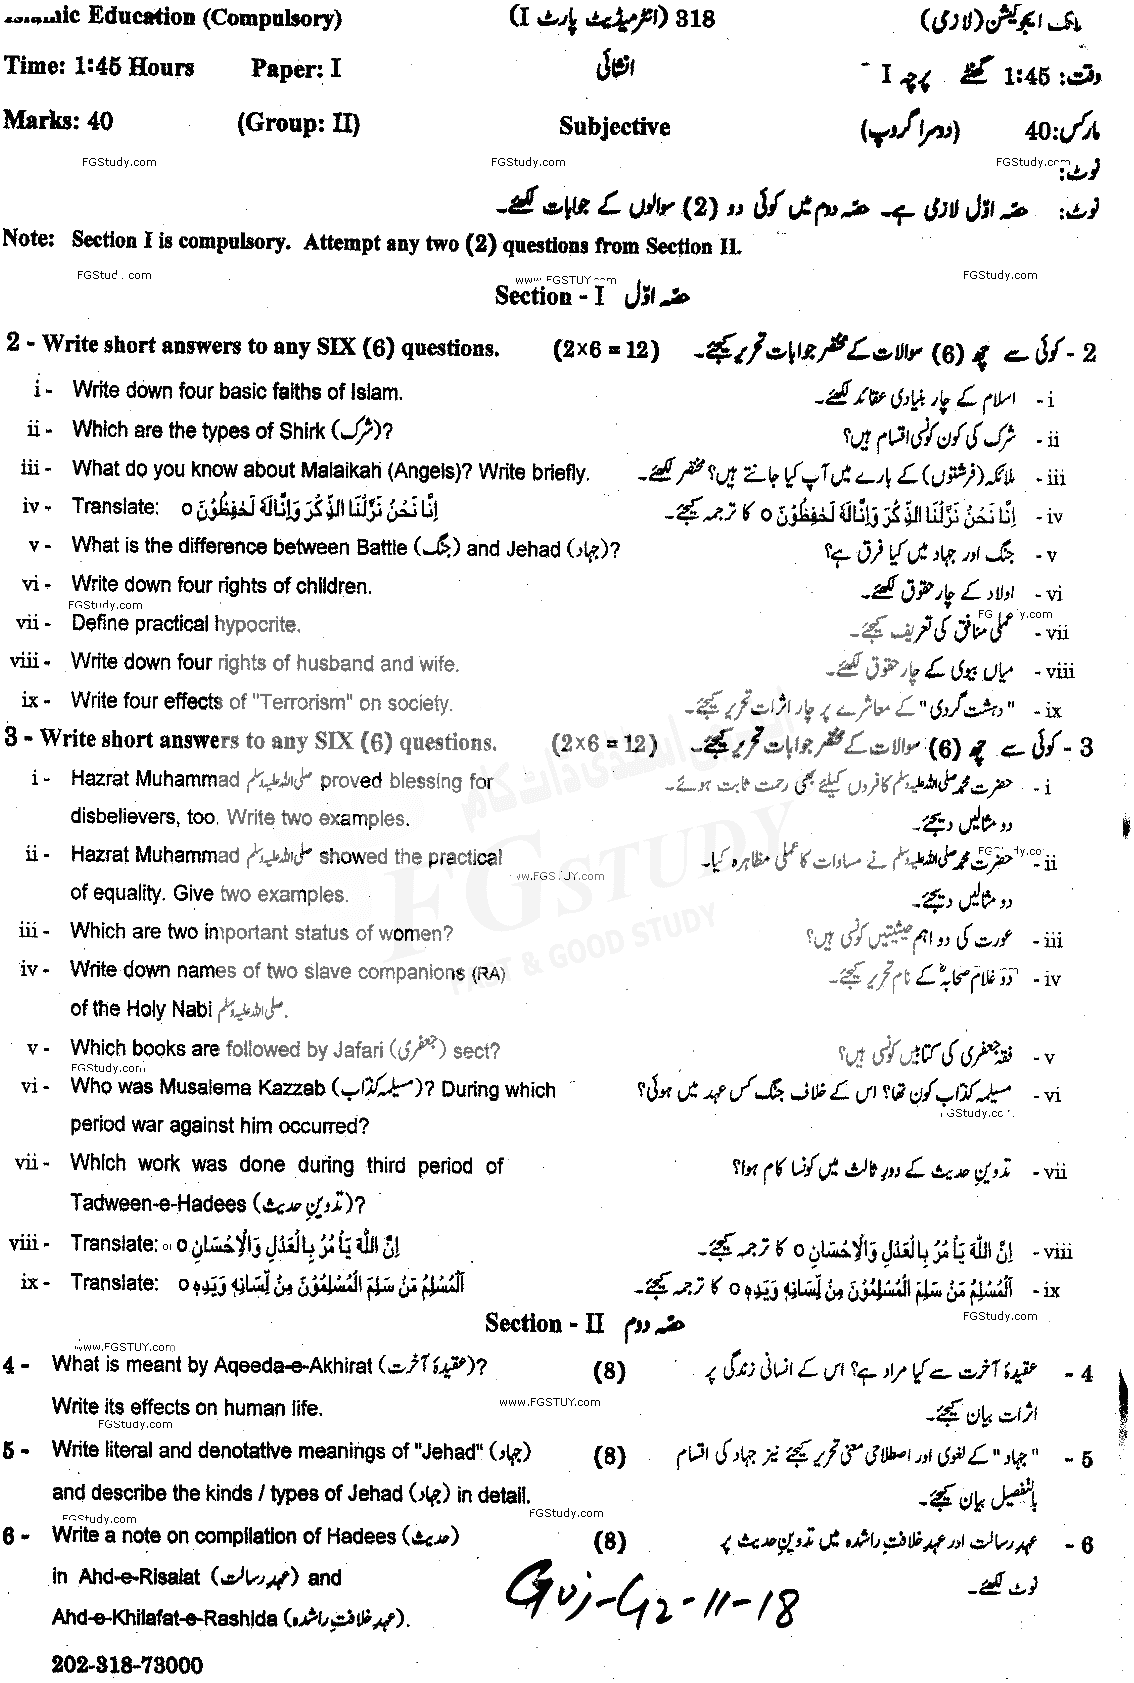 11th Class Islamic Education Past Paper 2018 Gujranwala Board Group 2 Subjective